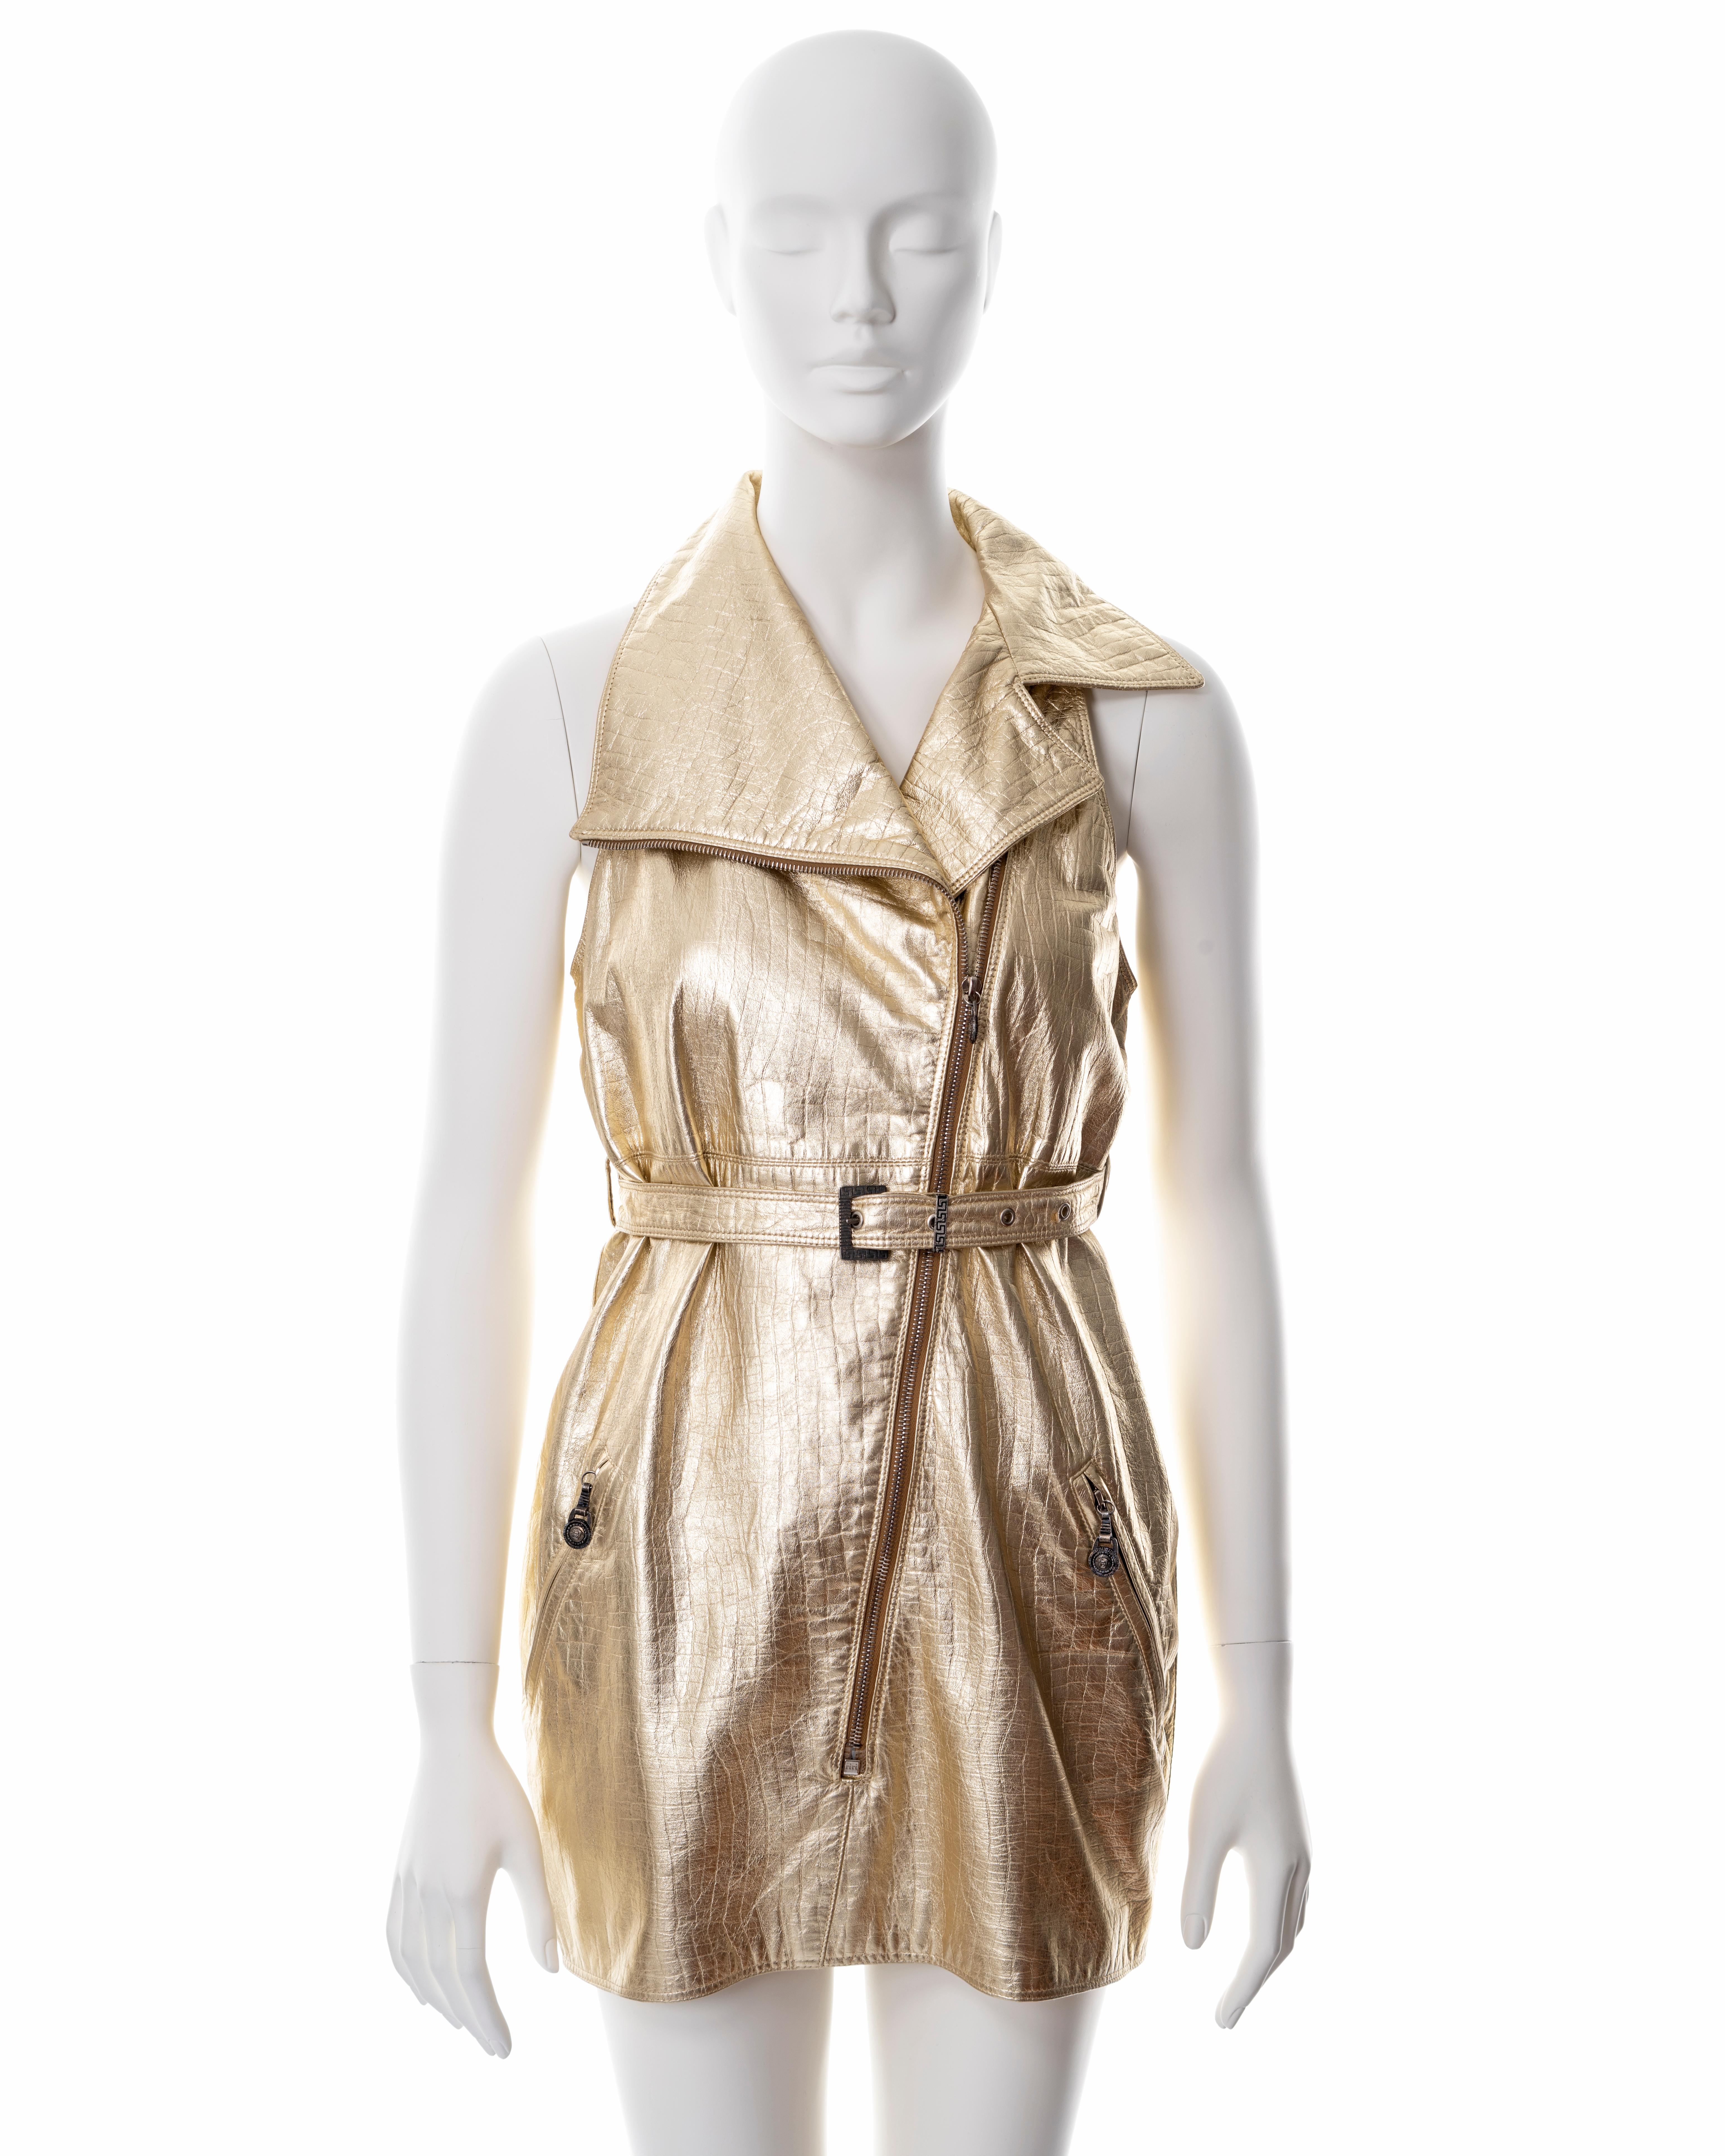 ▪ Gianni Versace metallic gold leather mini dress
▪ Sold by One of a Kind Archive
▪ Fall-Winter 1994
▪ Croc-embossed 
▪ Diagonal front zipper 
▪ 2 front pockets 
▪ IT 40 - FR 36 - UK 8 - US 4
▪ Made in Italy

All photographs in this listing